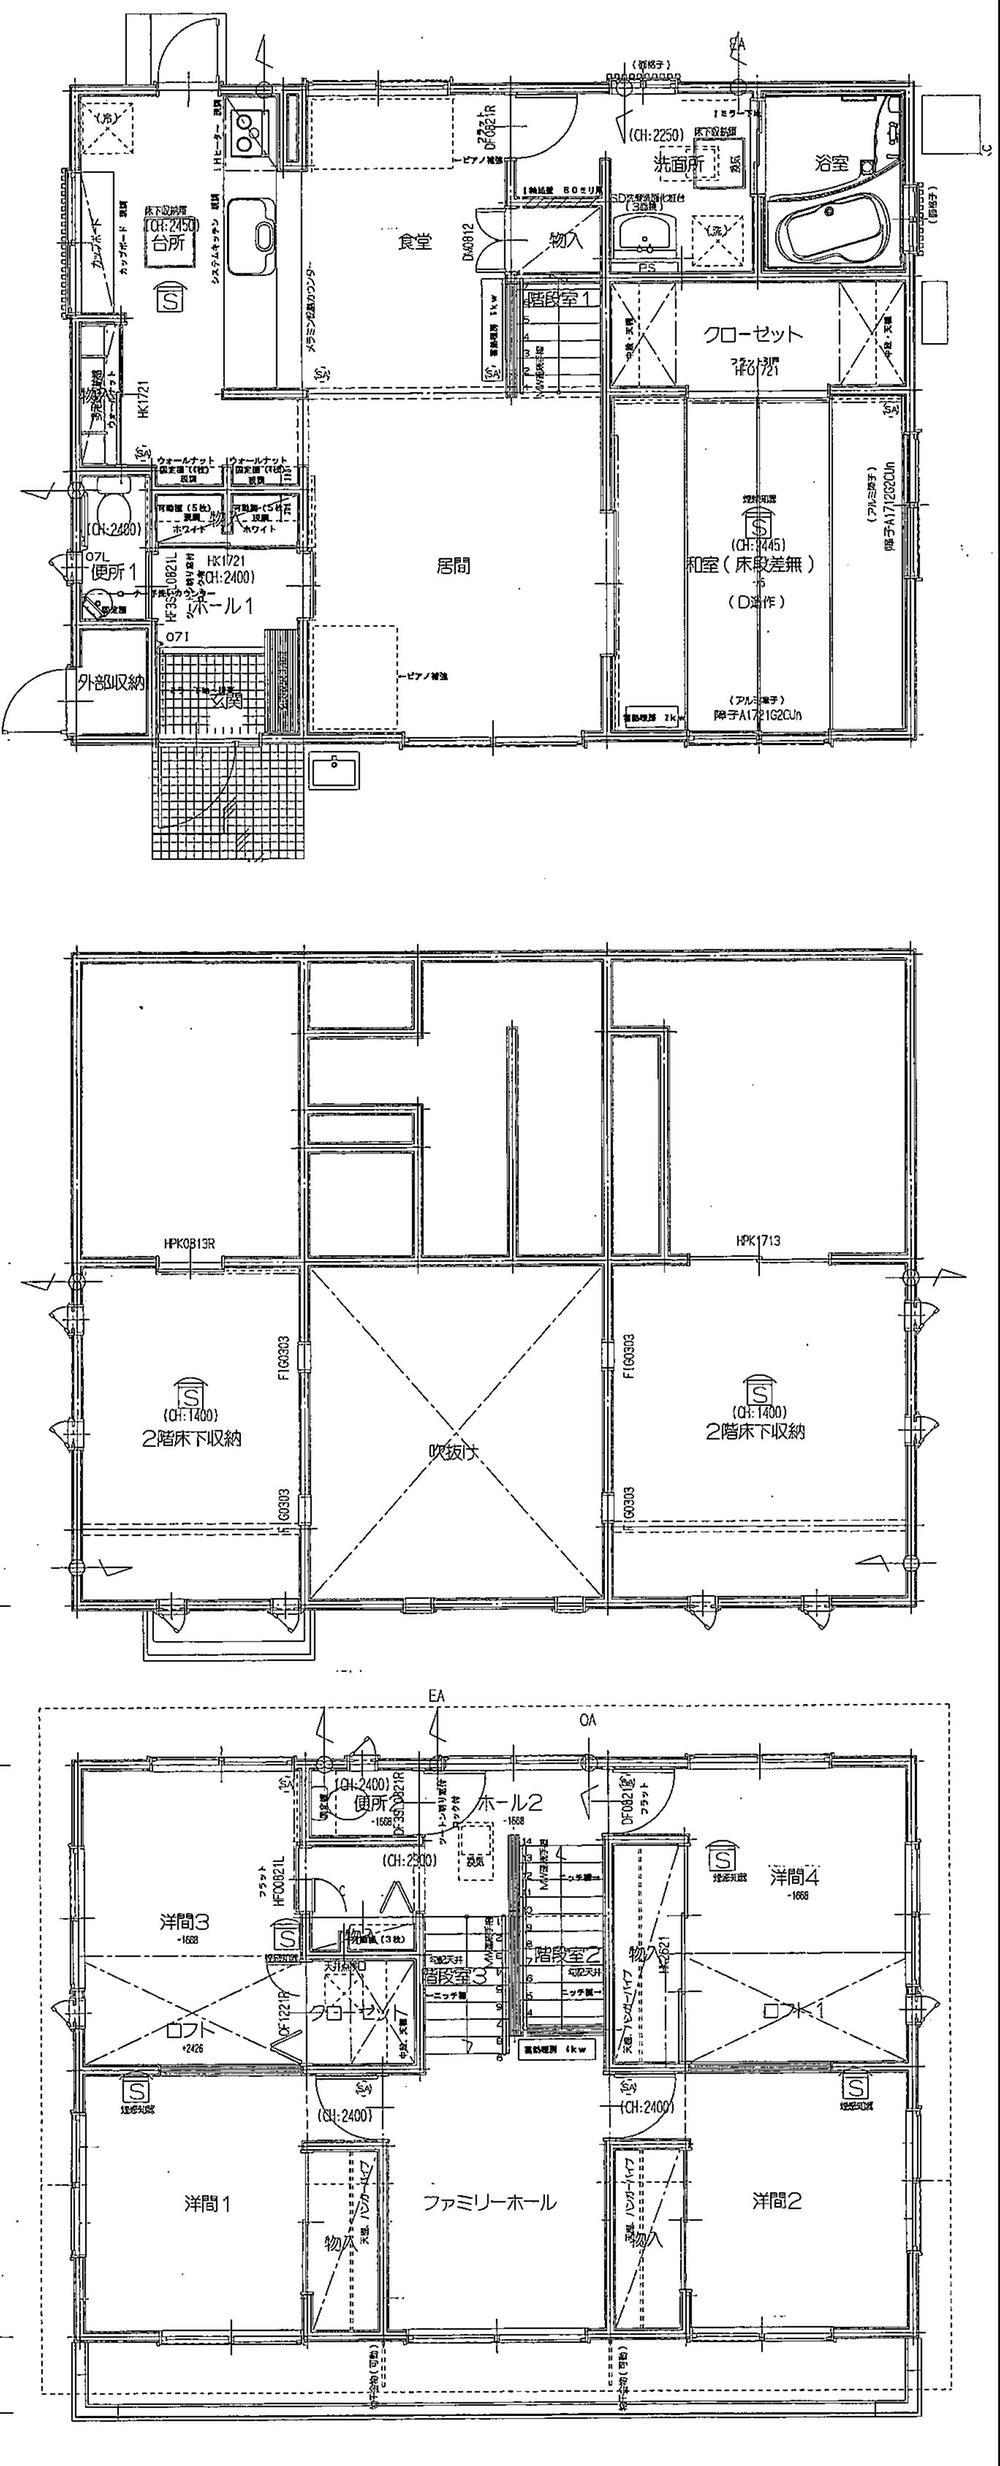 Floor plan. 33,200,000 yen, 5LDK, Land area 192.45 sq m , Building area 145.73 sq m spacious 5LDK, They can have their own rooms. 